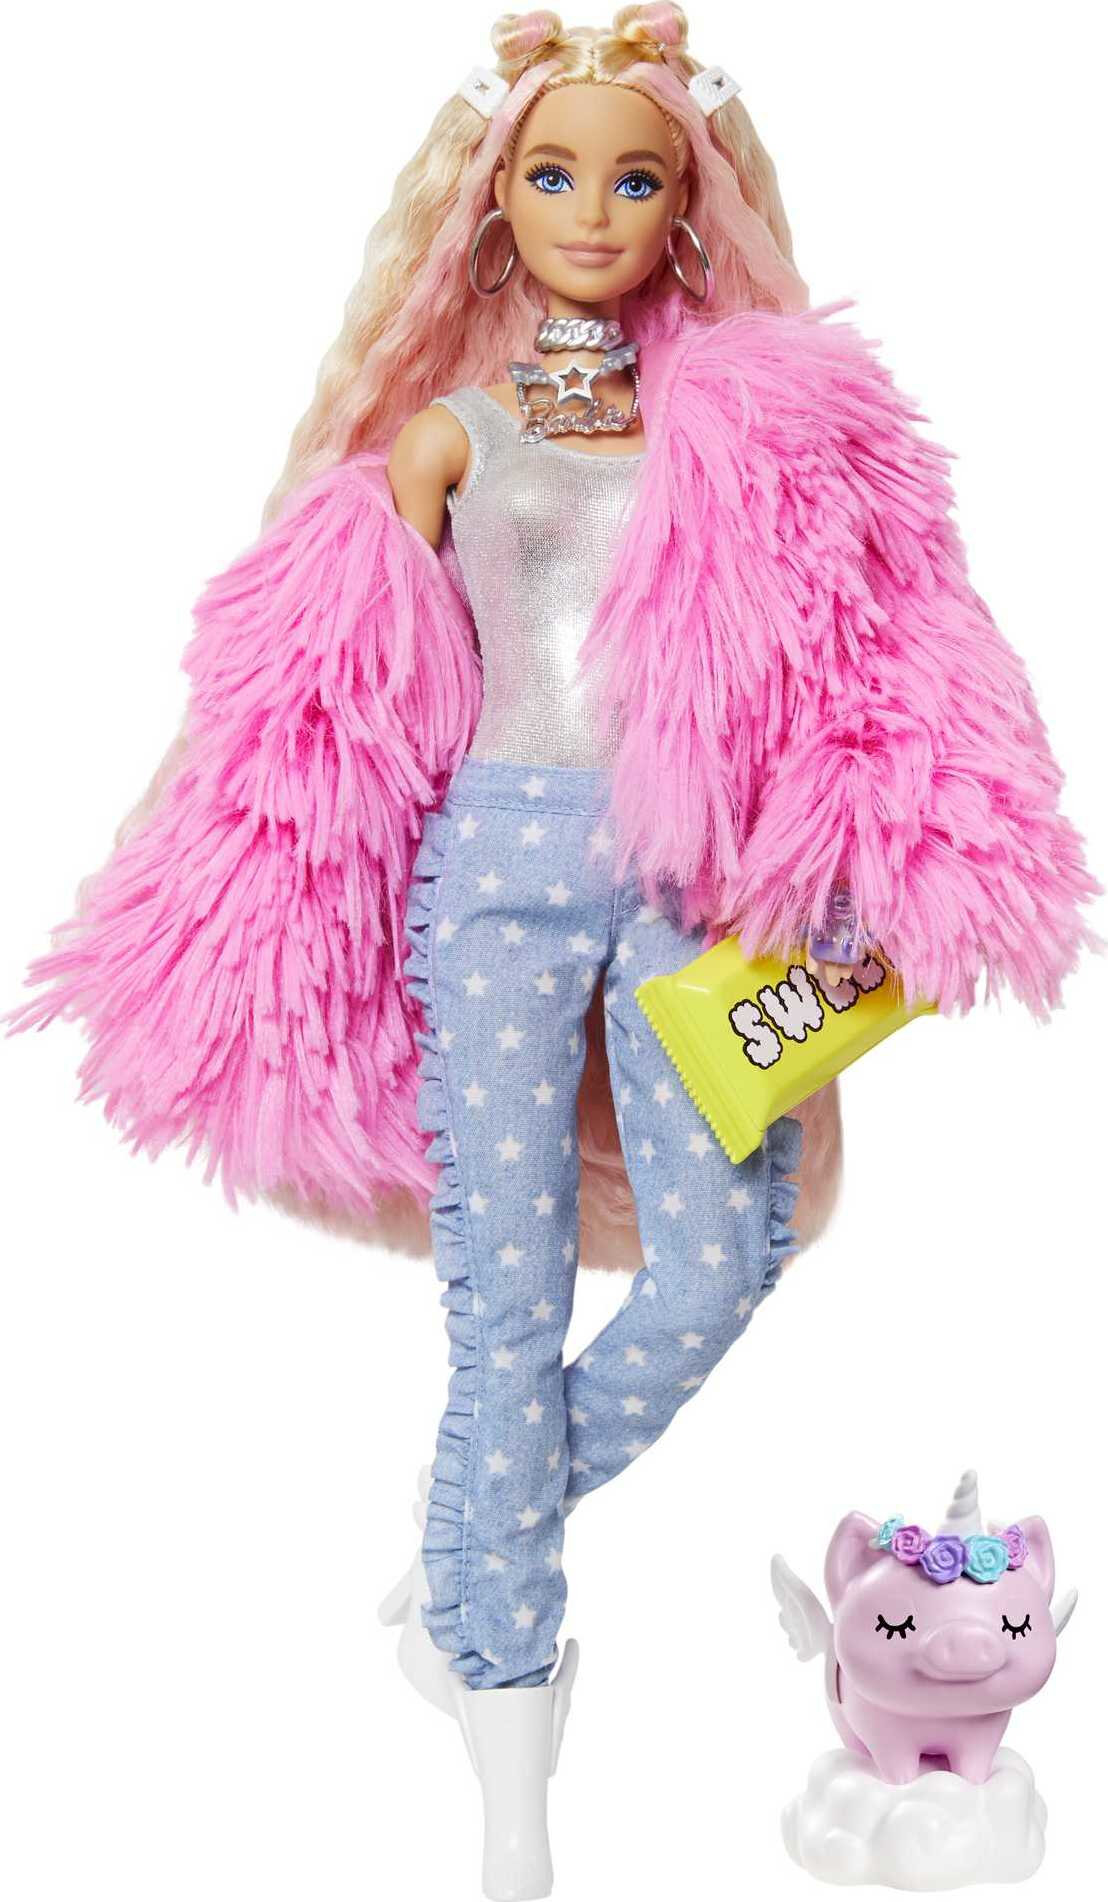 Barbie Extra Fashion Doll with Crimped Hair in Fluffy Pink Coat with Accessories & Pet - image 1 of 7